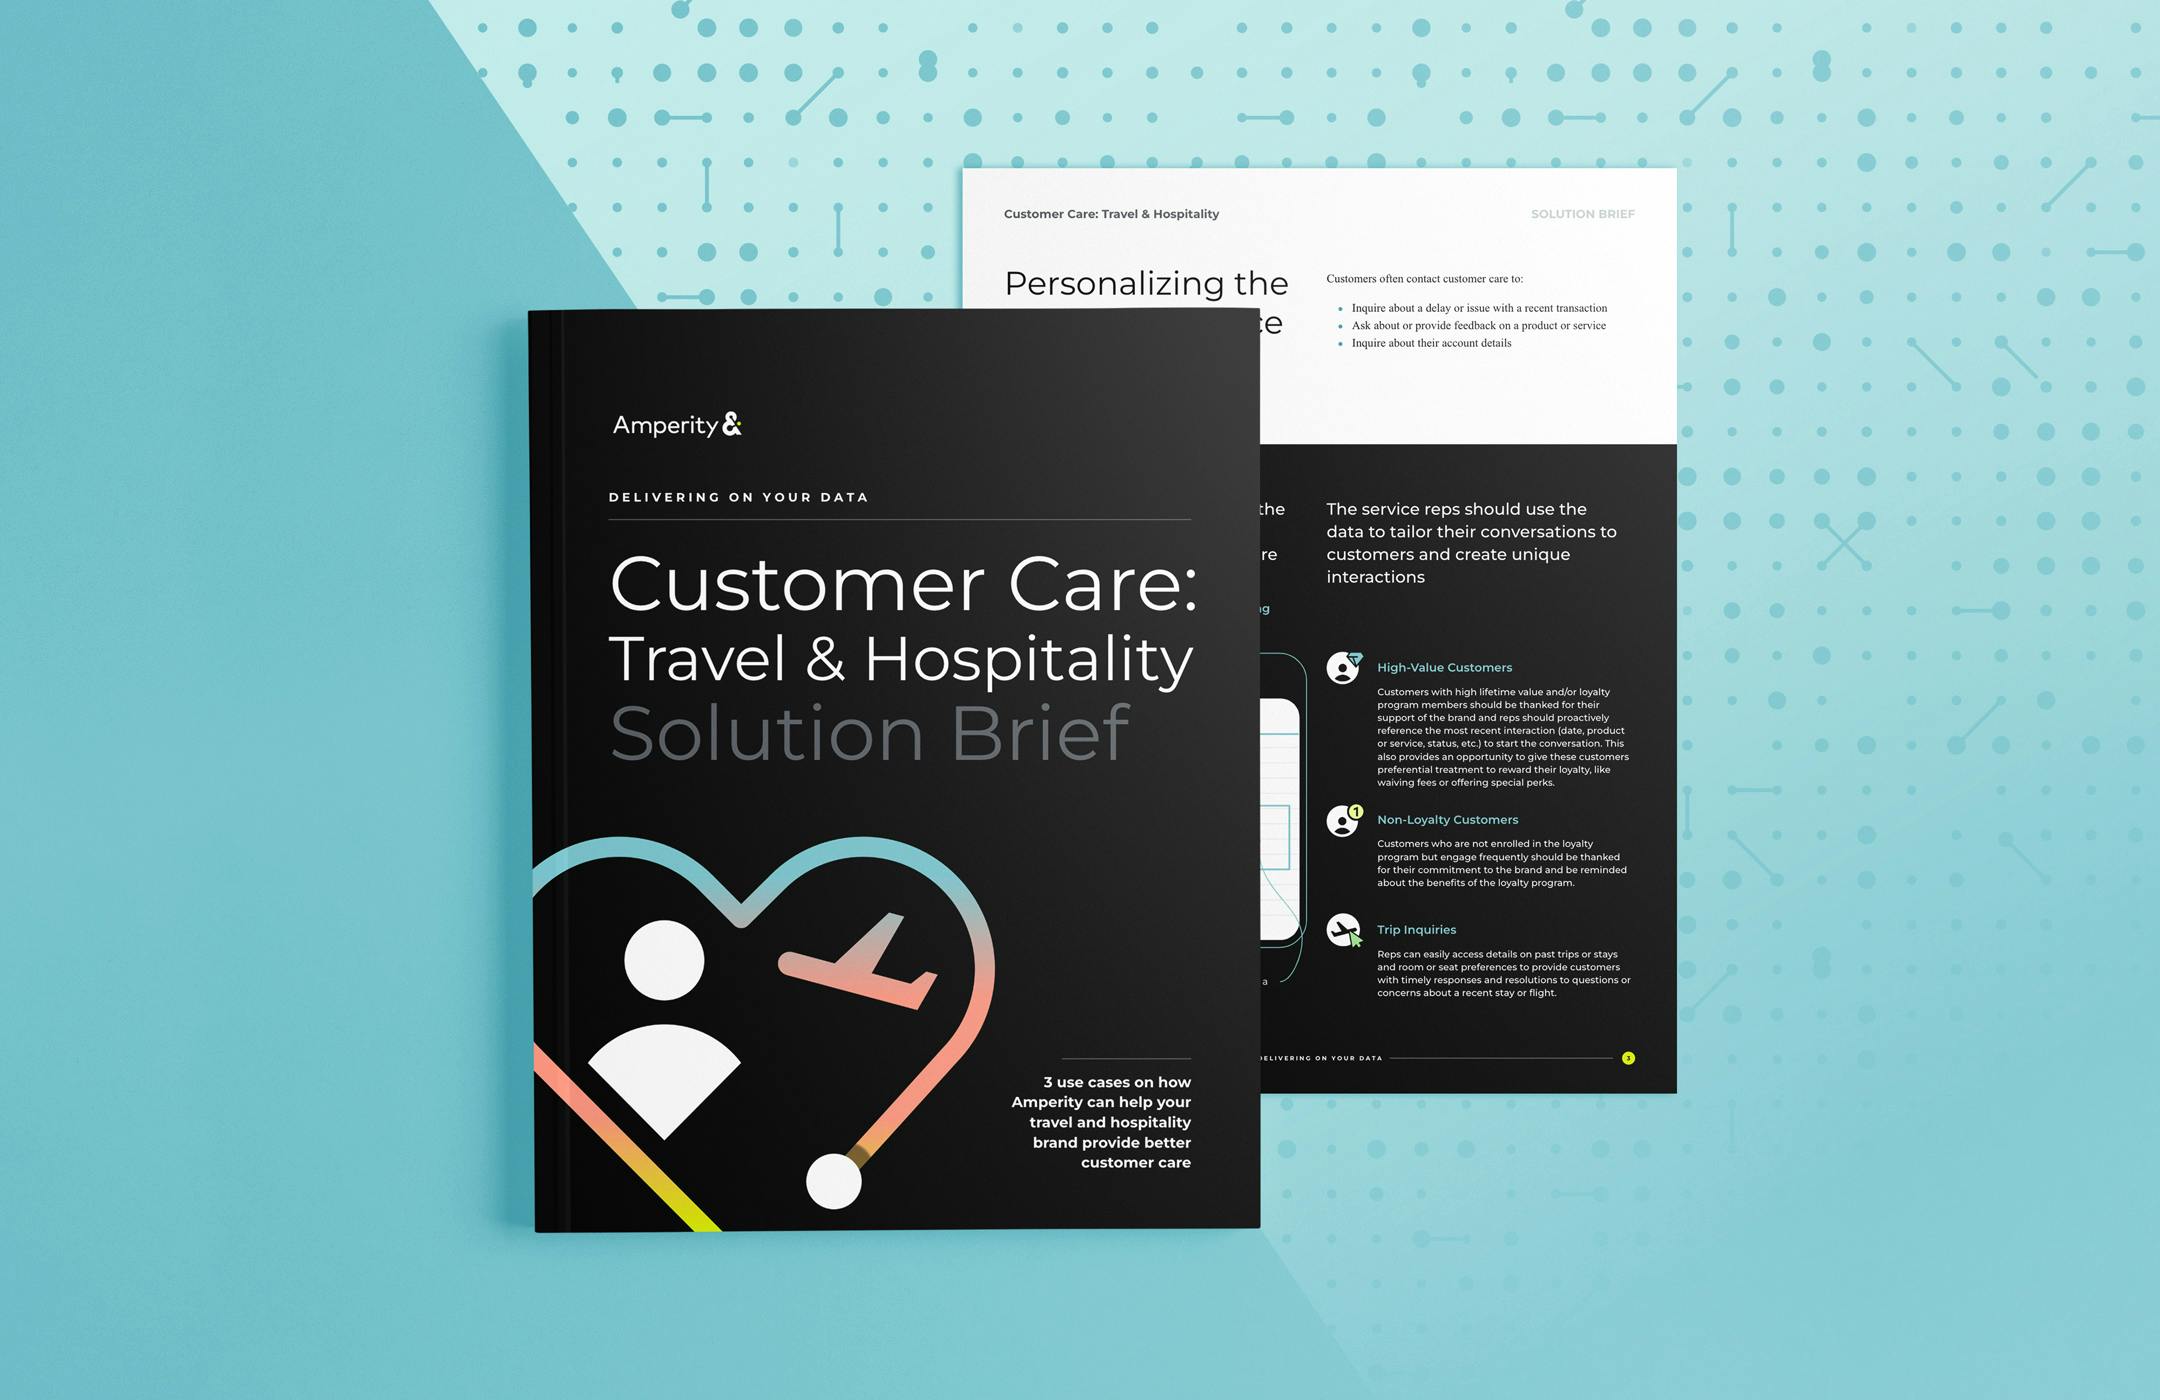 Preview image of the Customer Care for Travel & Hospitality Solution Brief